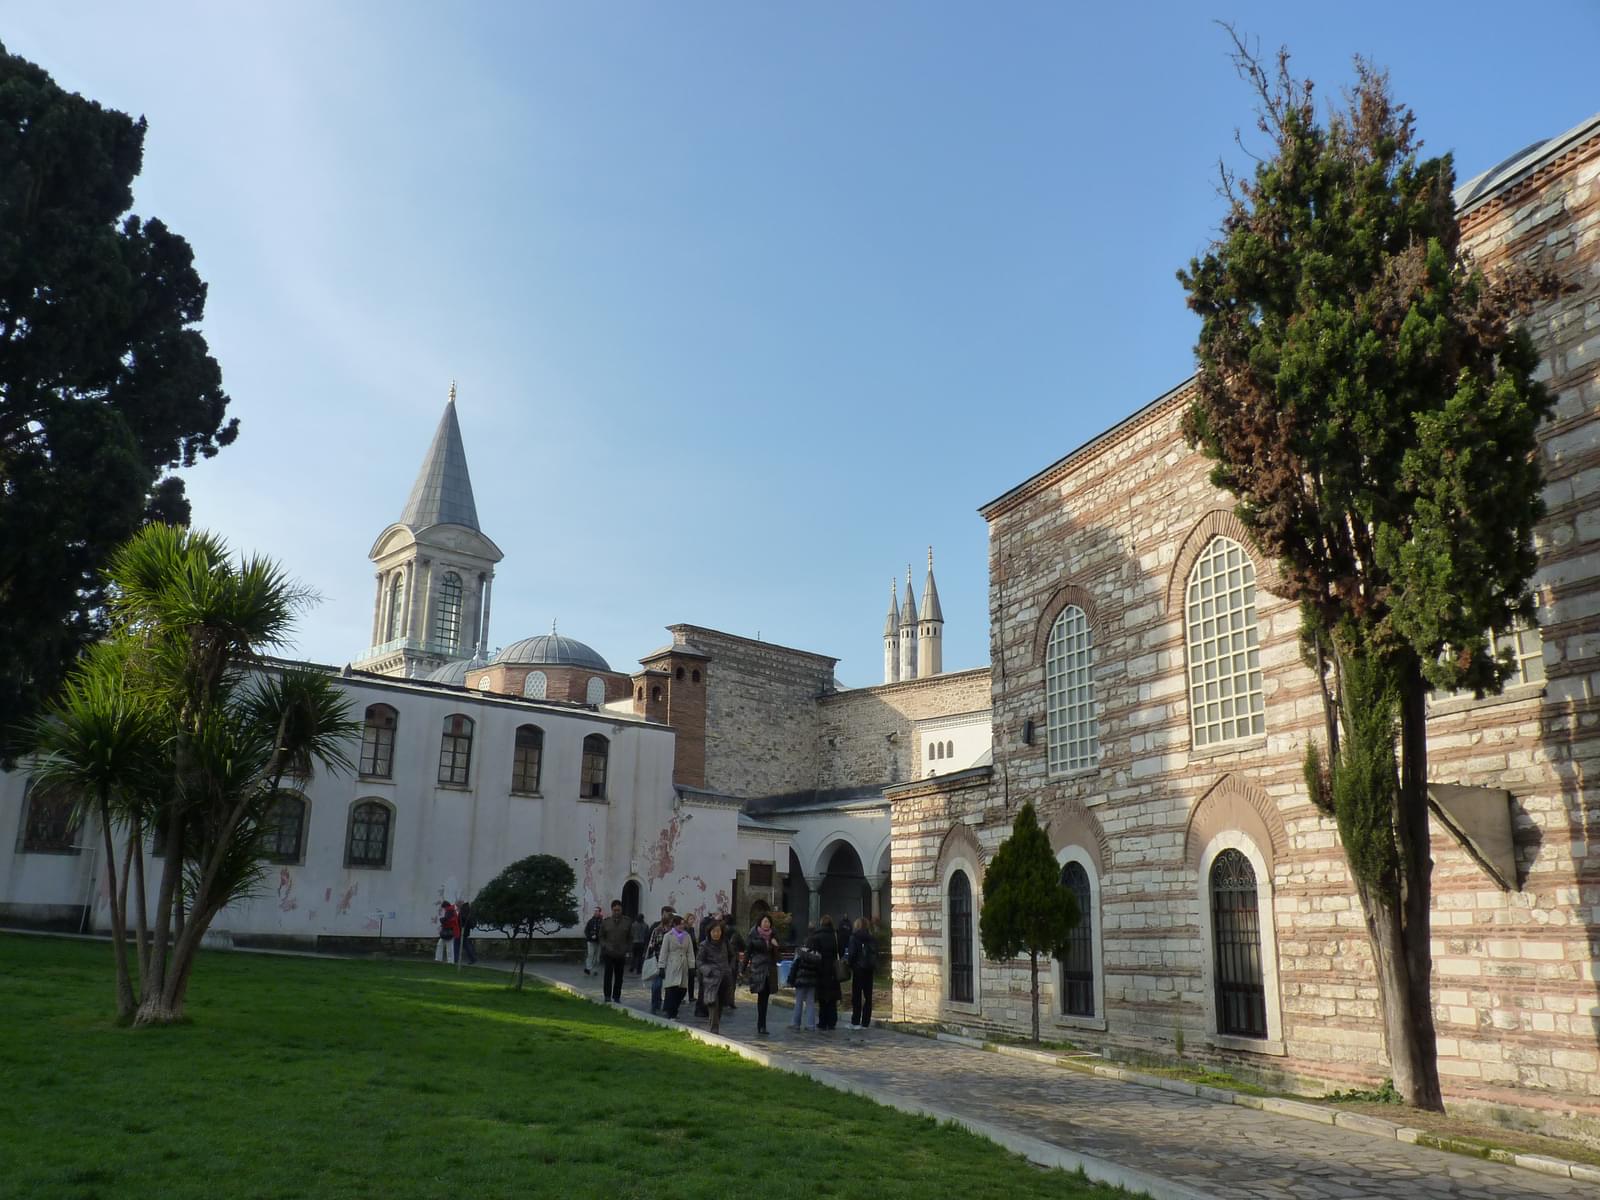 What to Expect at the Topkapi Palace?